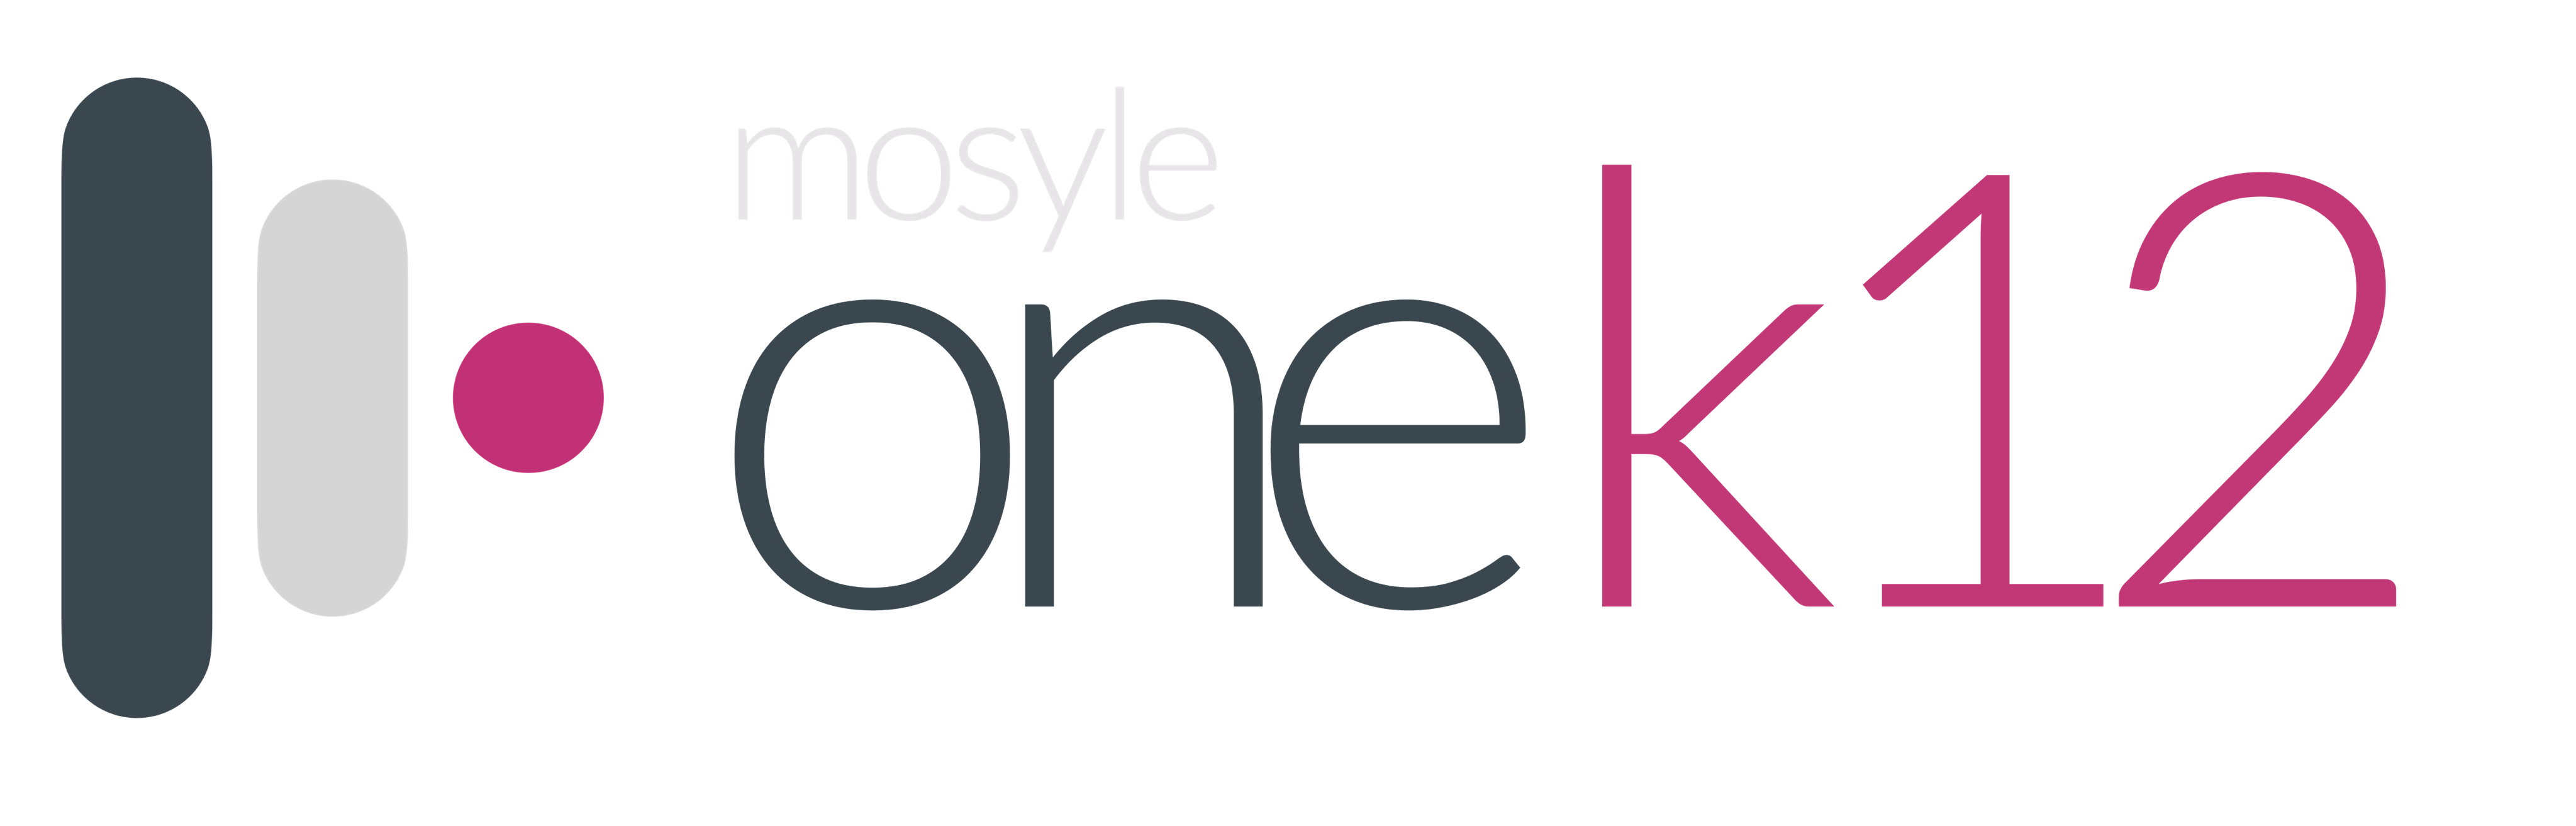 Mosyle Manager One K12